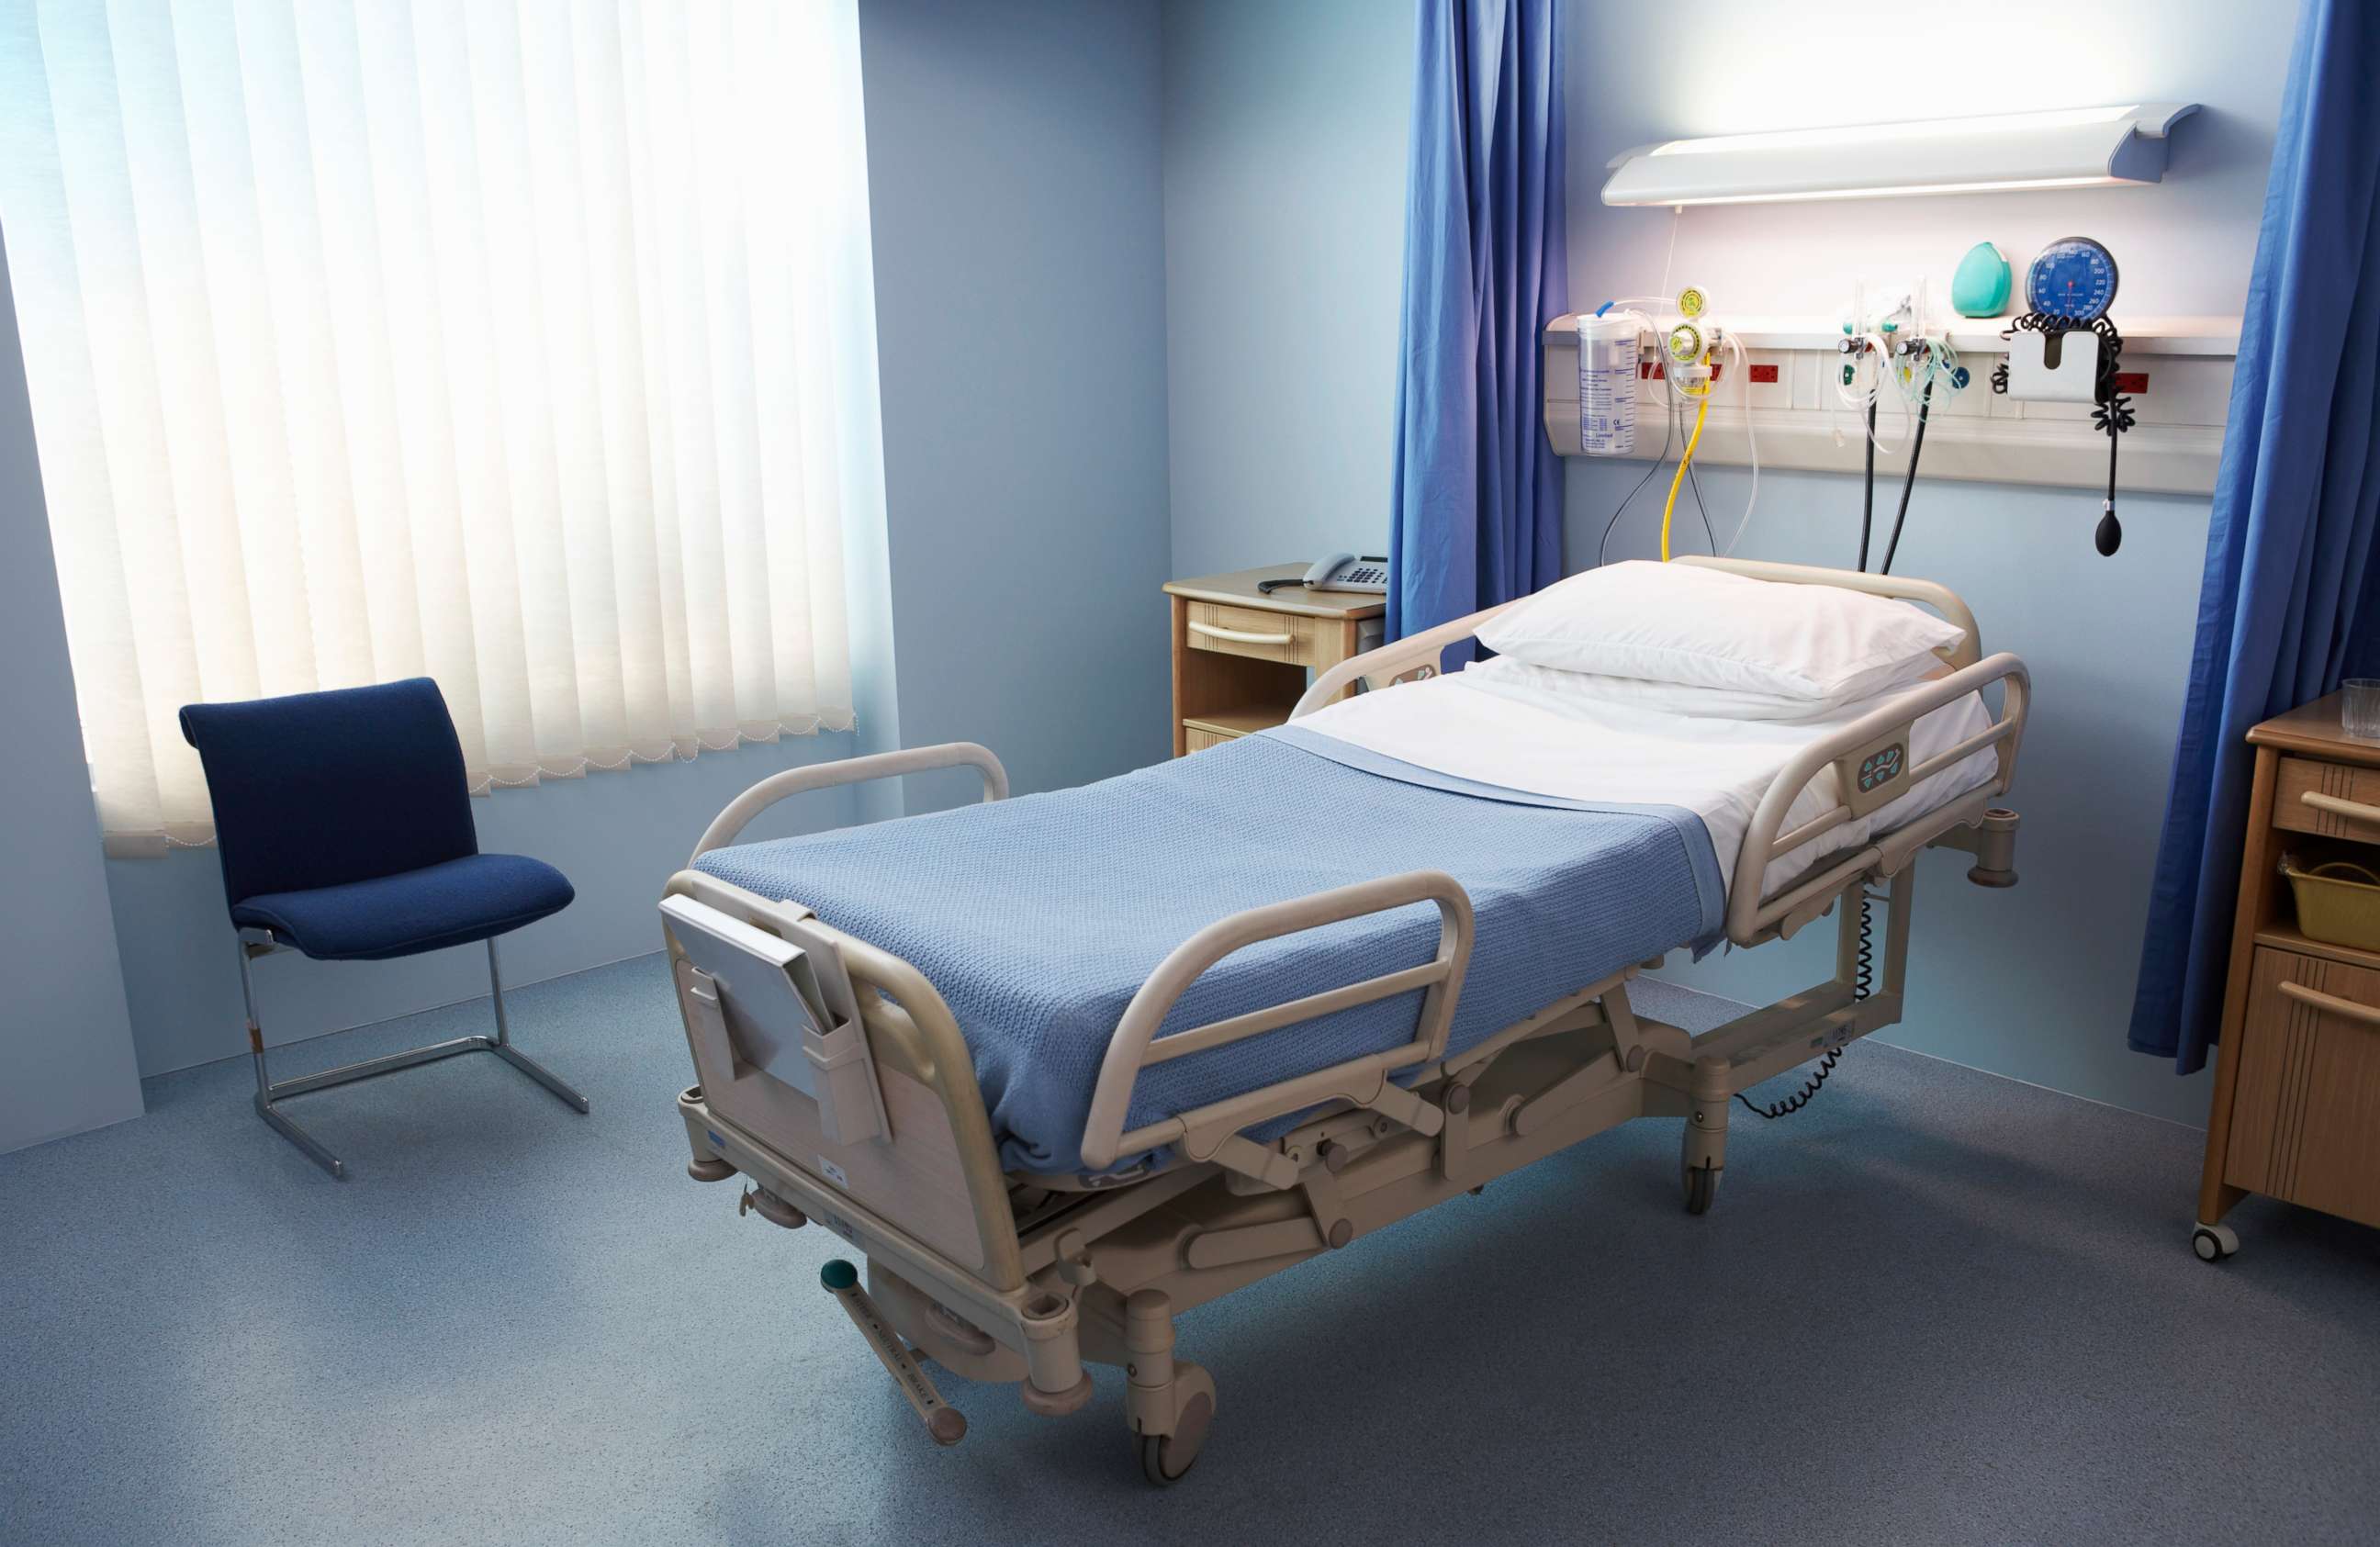 PHOTO: A hospital bed is seen in this undated stock image.